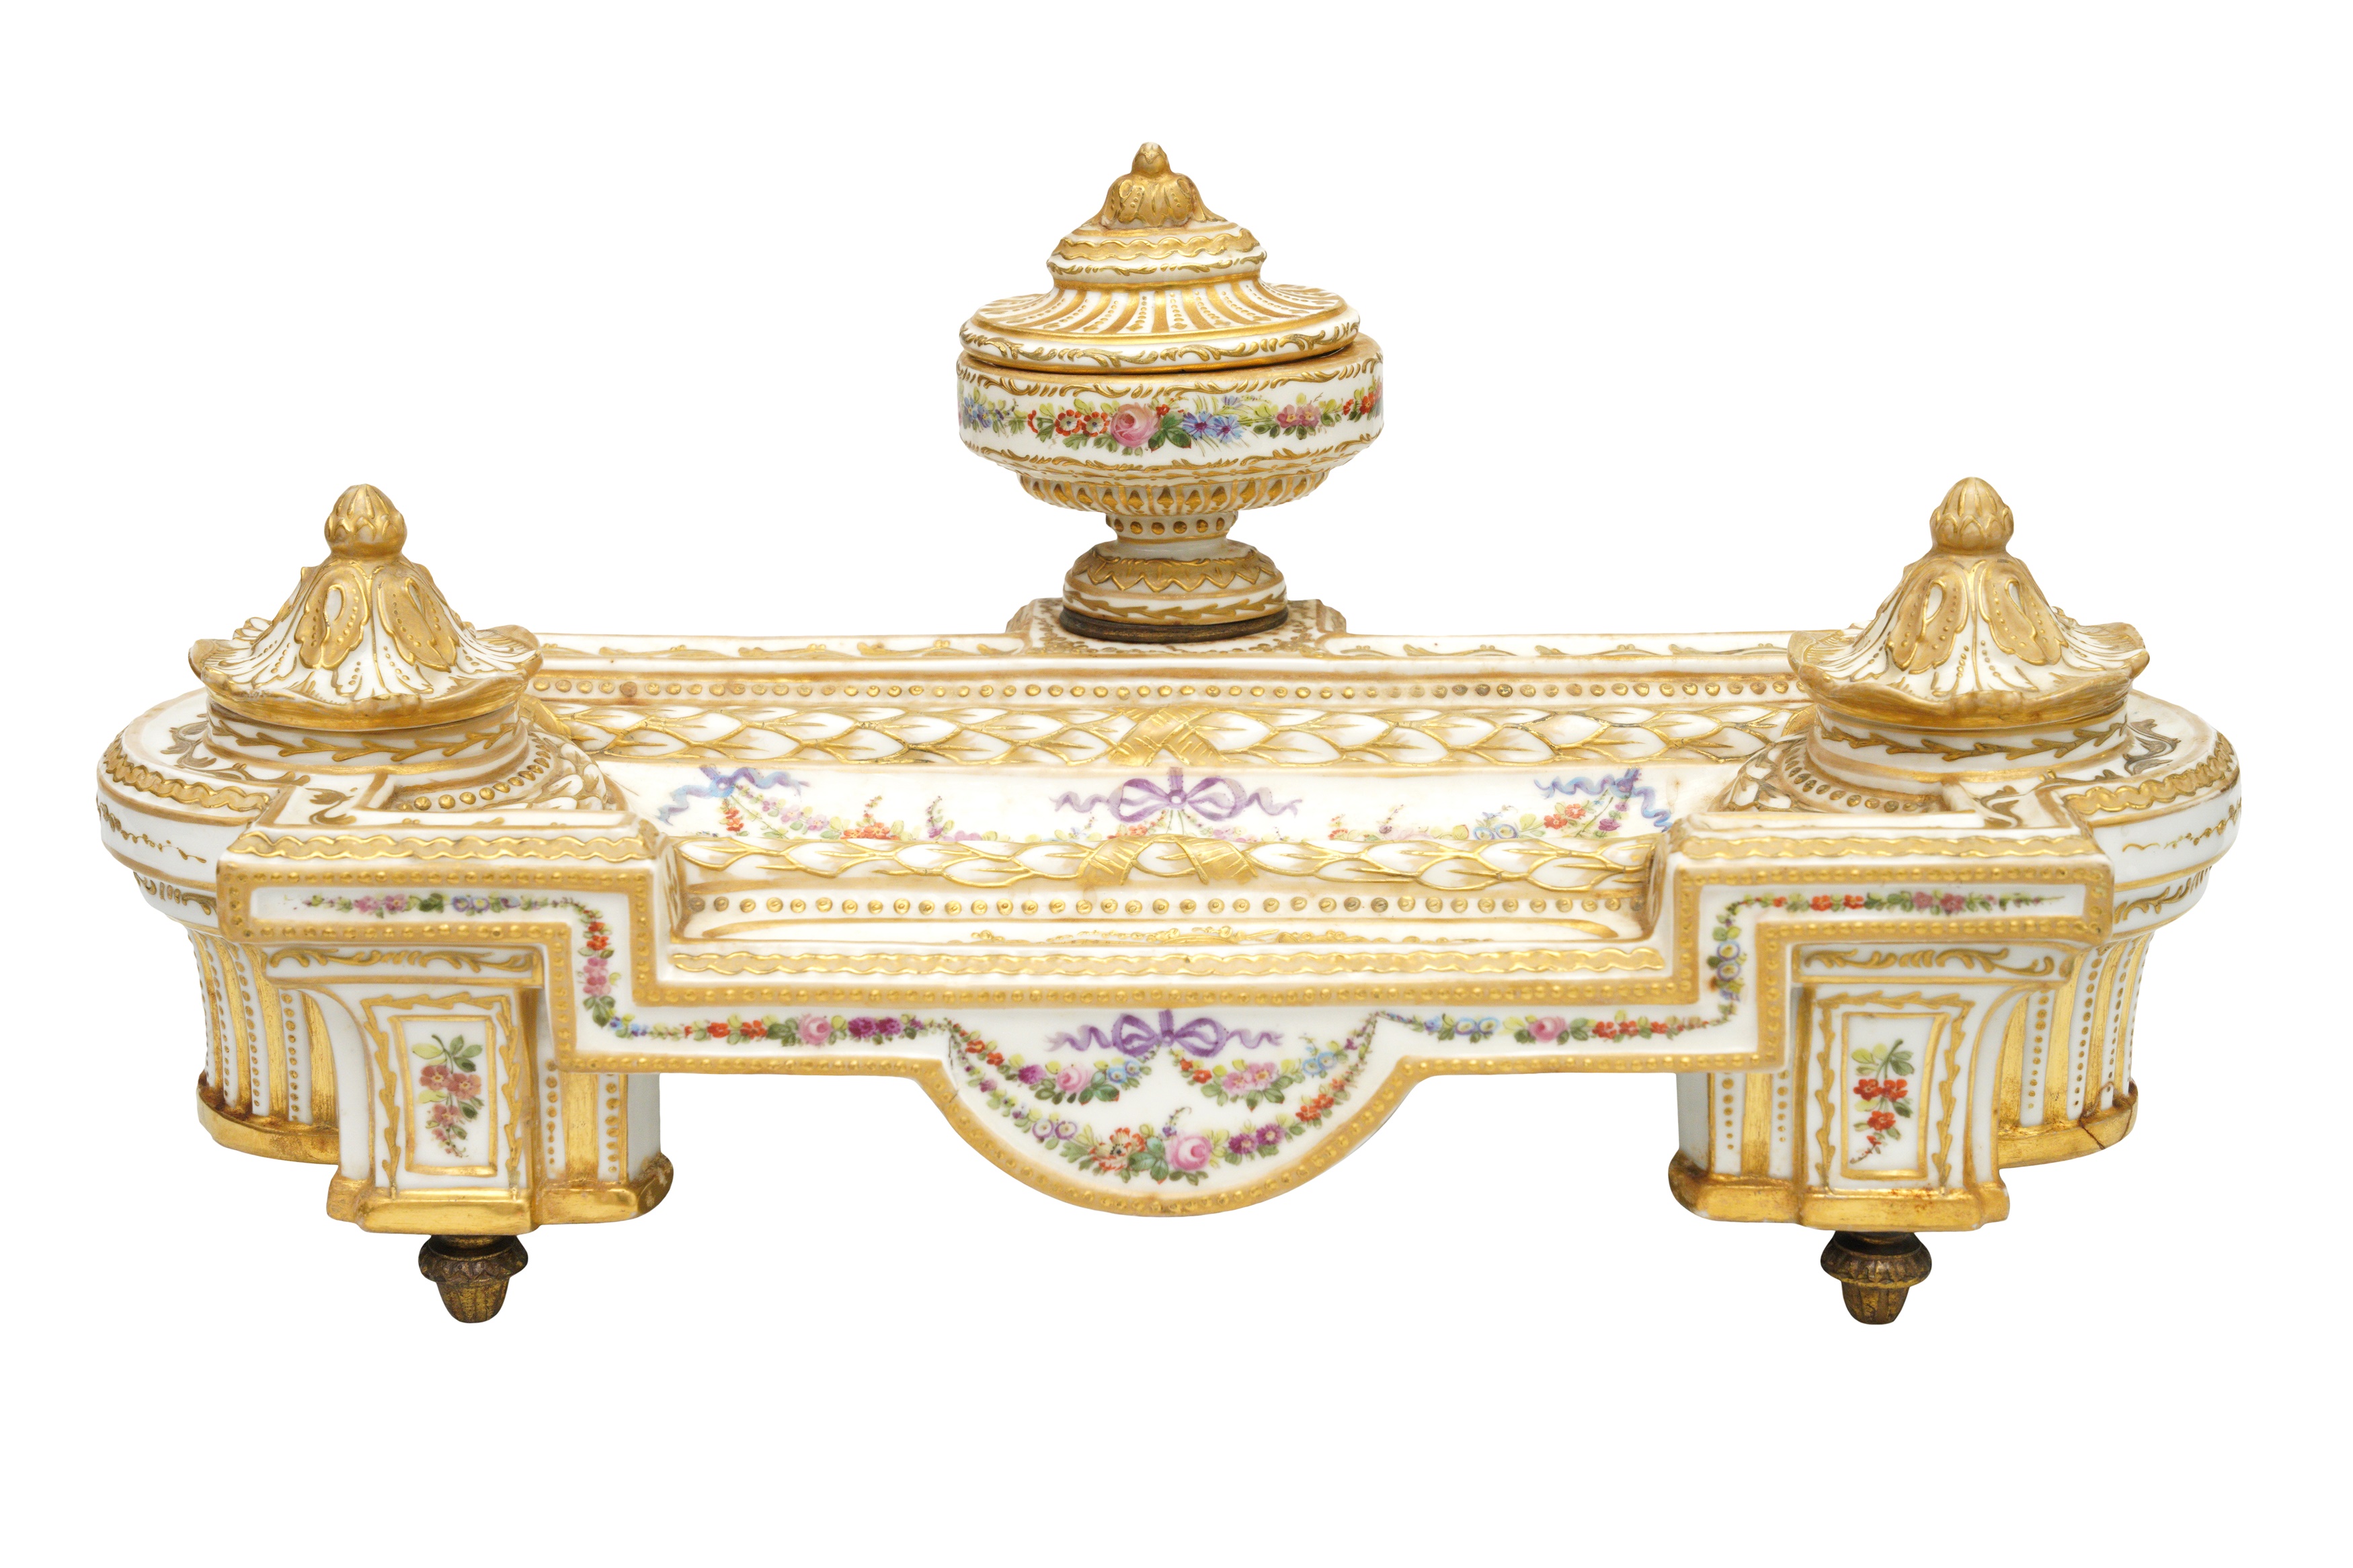 A FRENCH PARIS PORCELAIN PEN TRAY OF NEOCLASSICAL DESIGN, LATE 19TH CENTURY